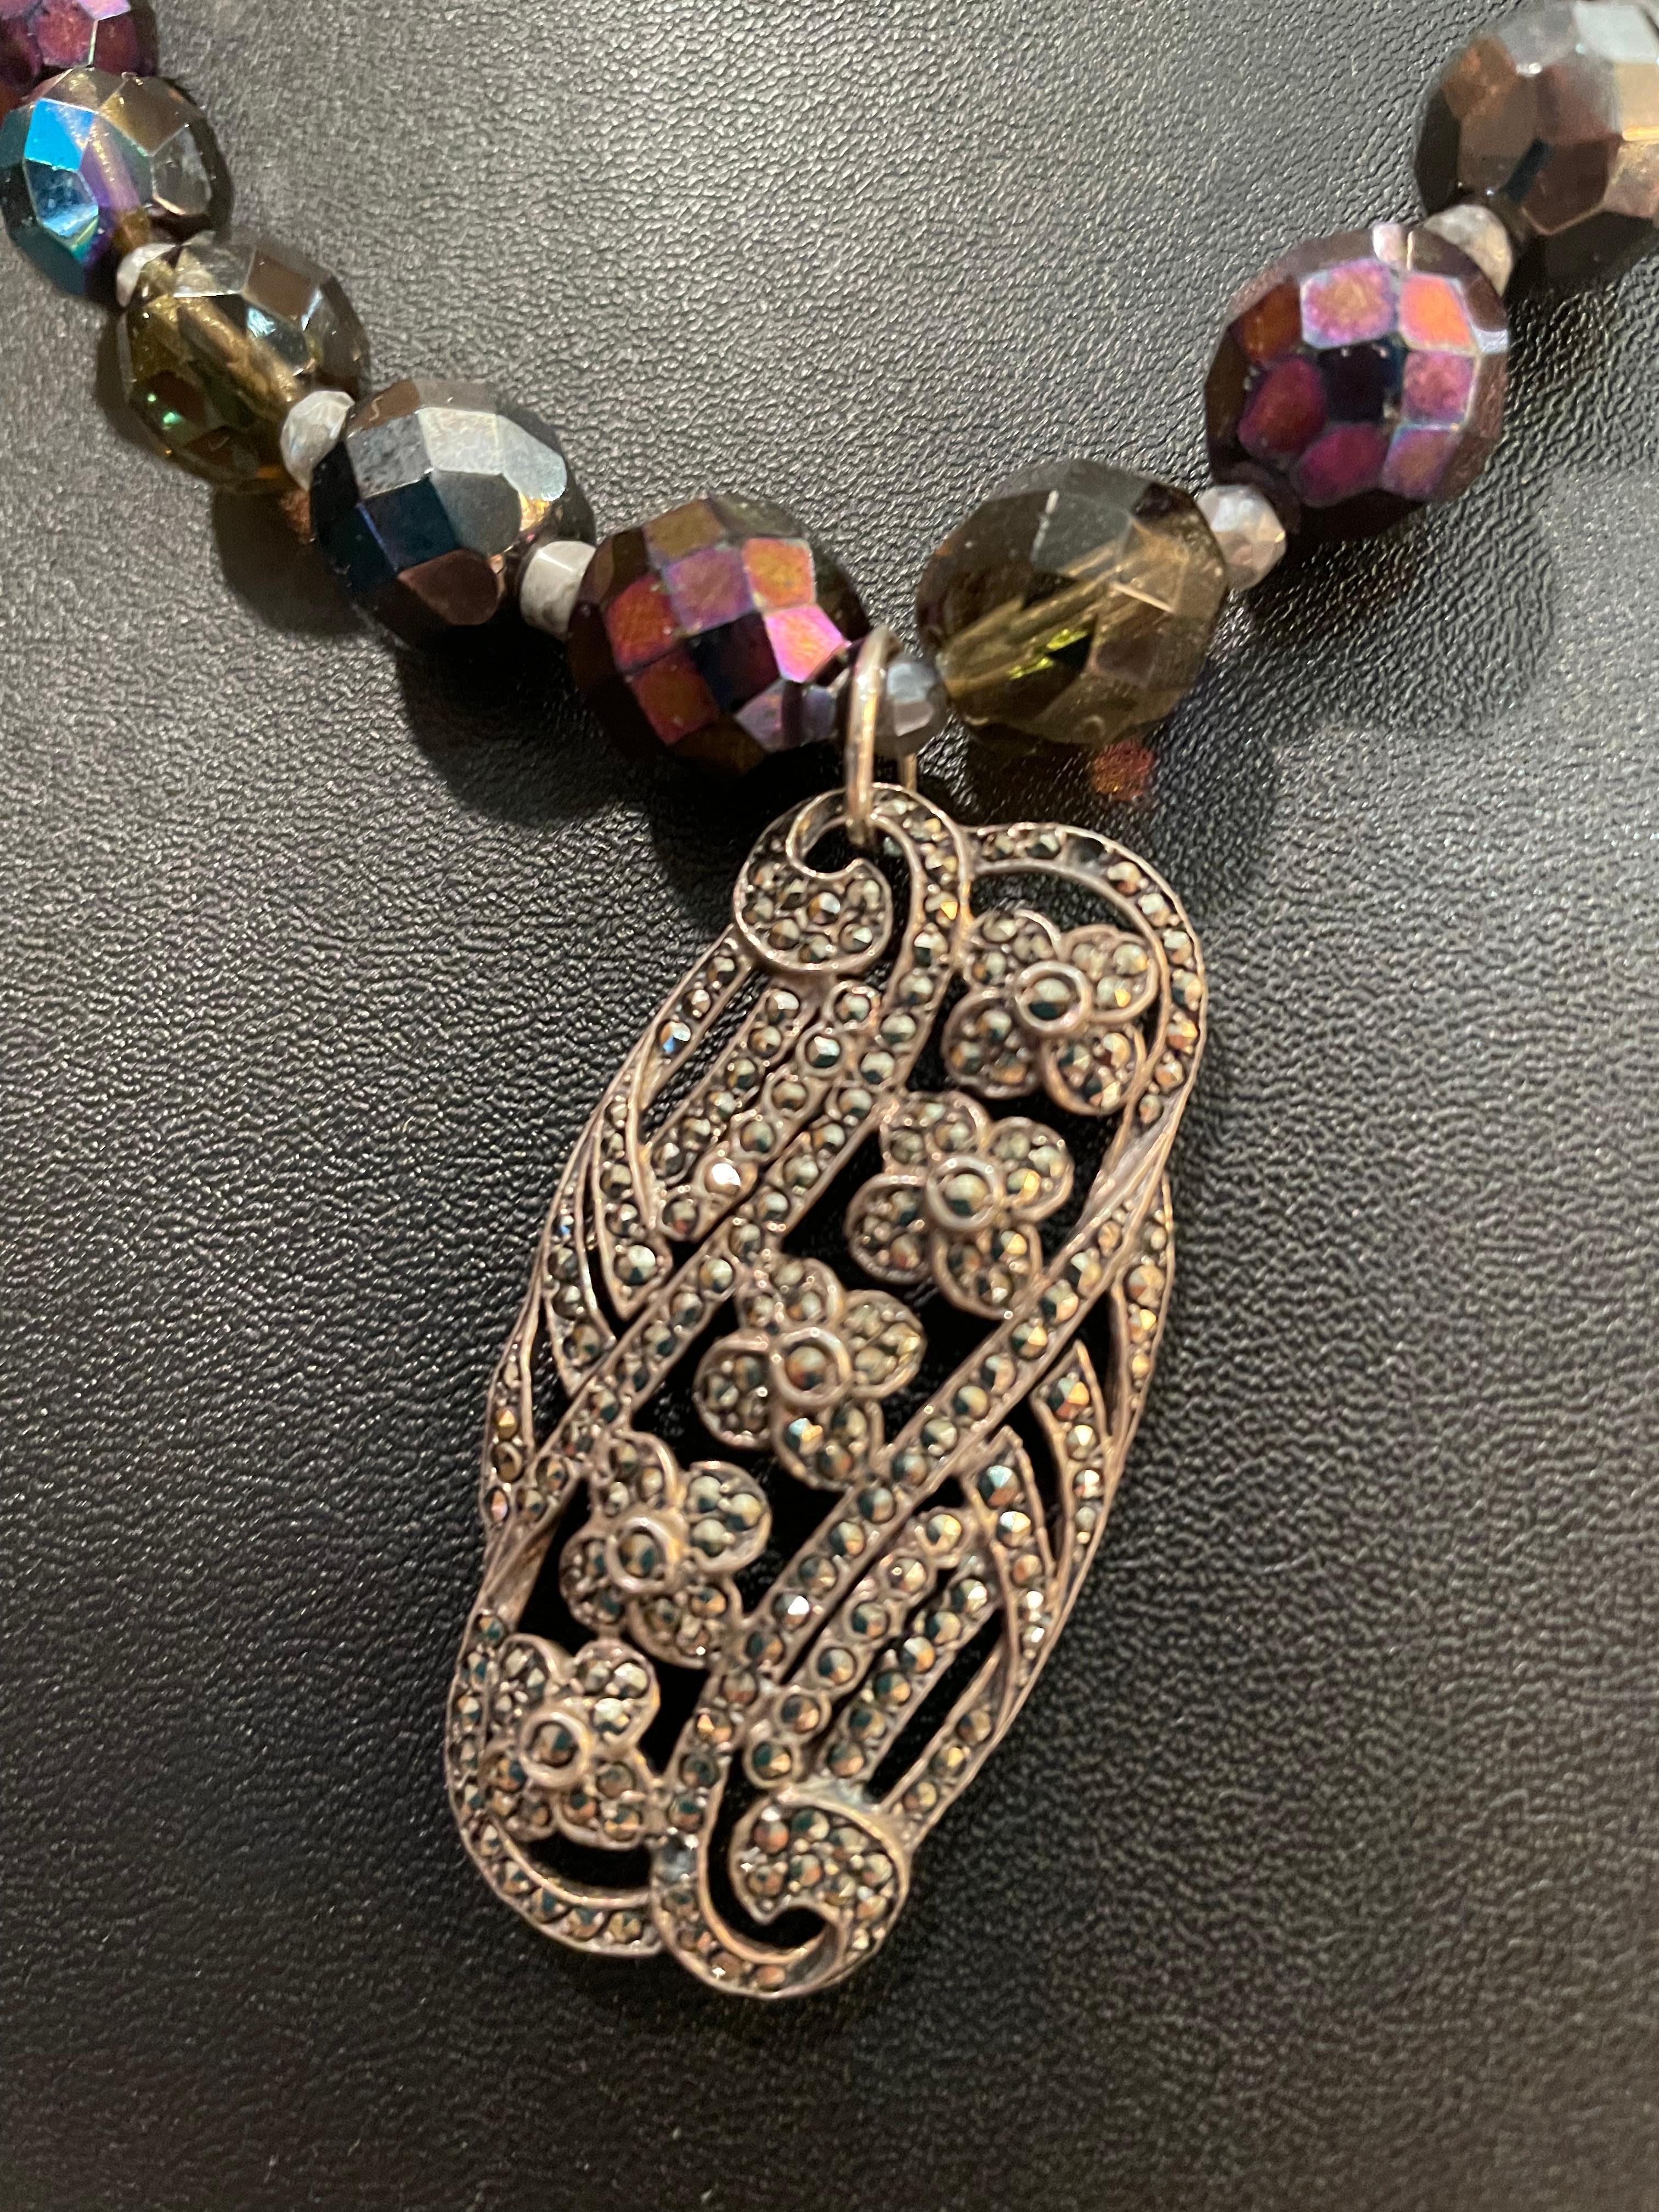 Lorraine’s Bijoux offers a Stunning necklace with a vintage sterling Silver and Marcasite Brooch Pendant and large Purple Aurora Borealis Czech crystal beads. This gorgeous piece will enhance any outfit, from a pair of jeans to an evening